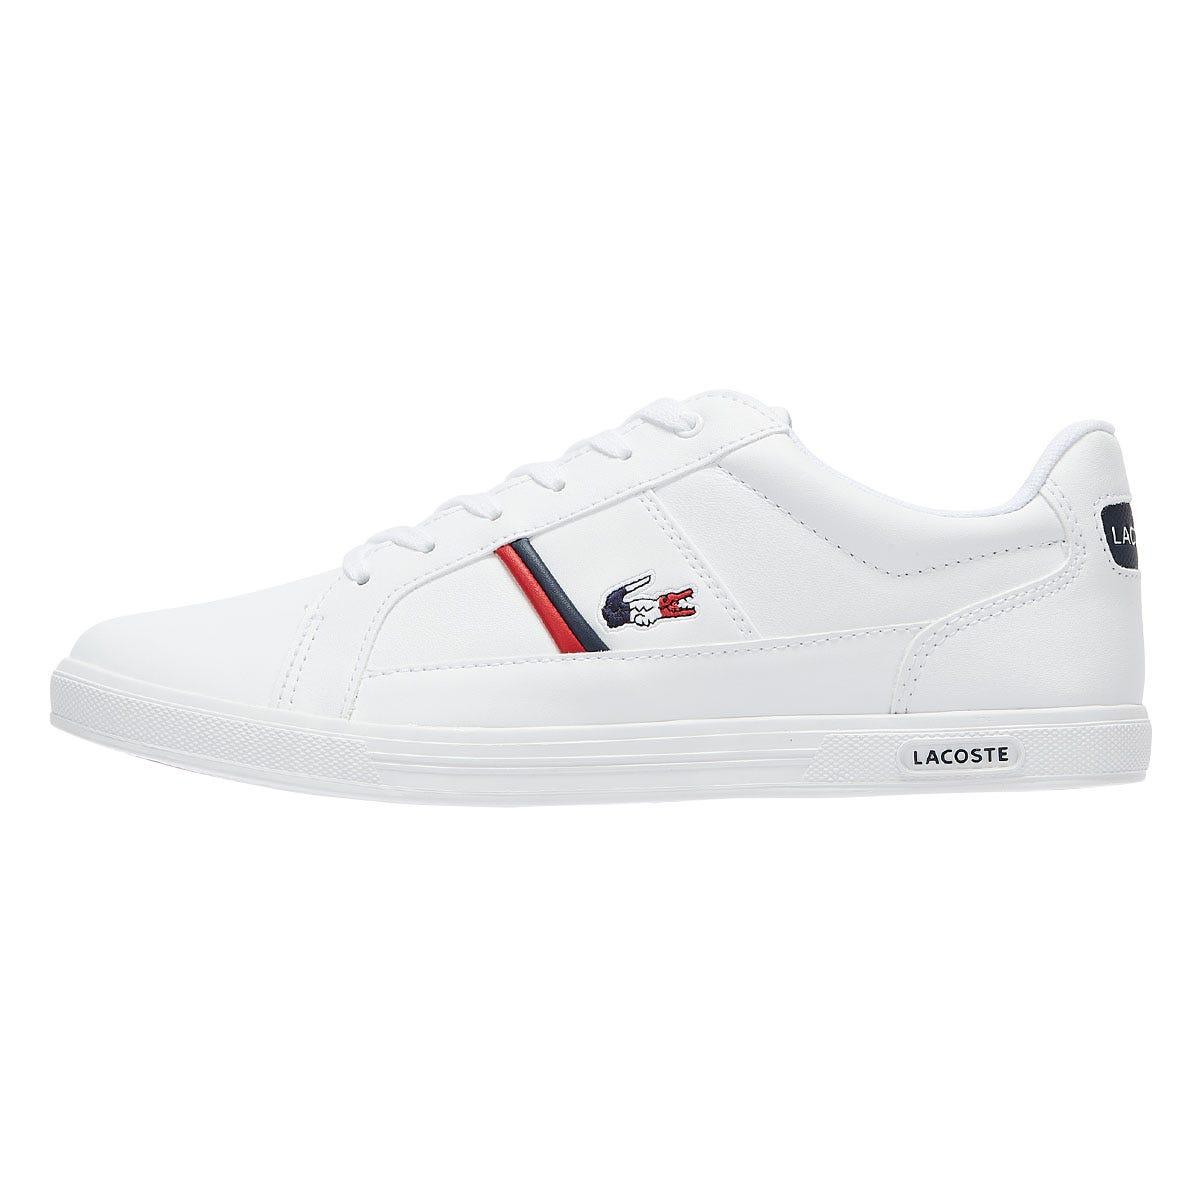 Forekomme Quilt Viva Lacoste Leather Europa Tri 1 Trainers in White for Men - Lyst